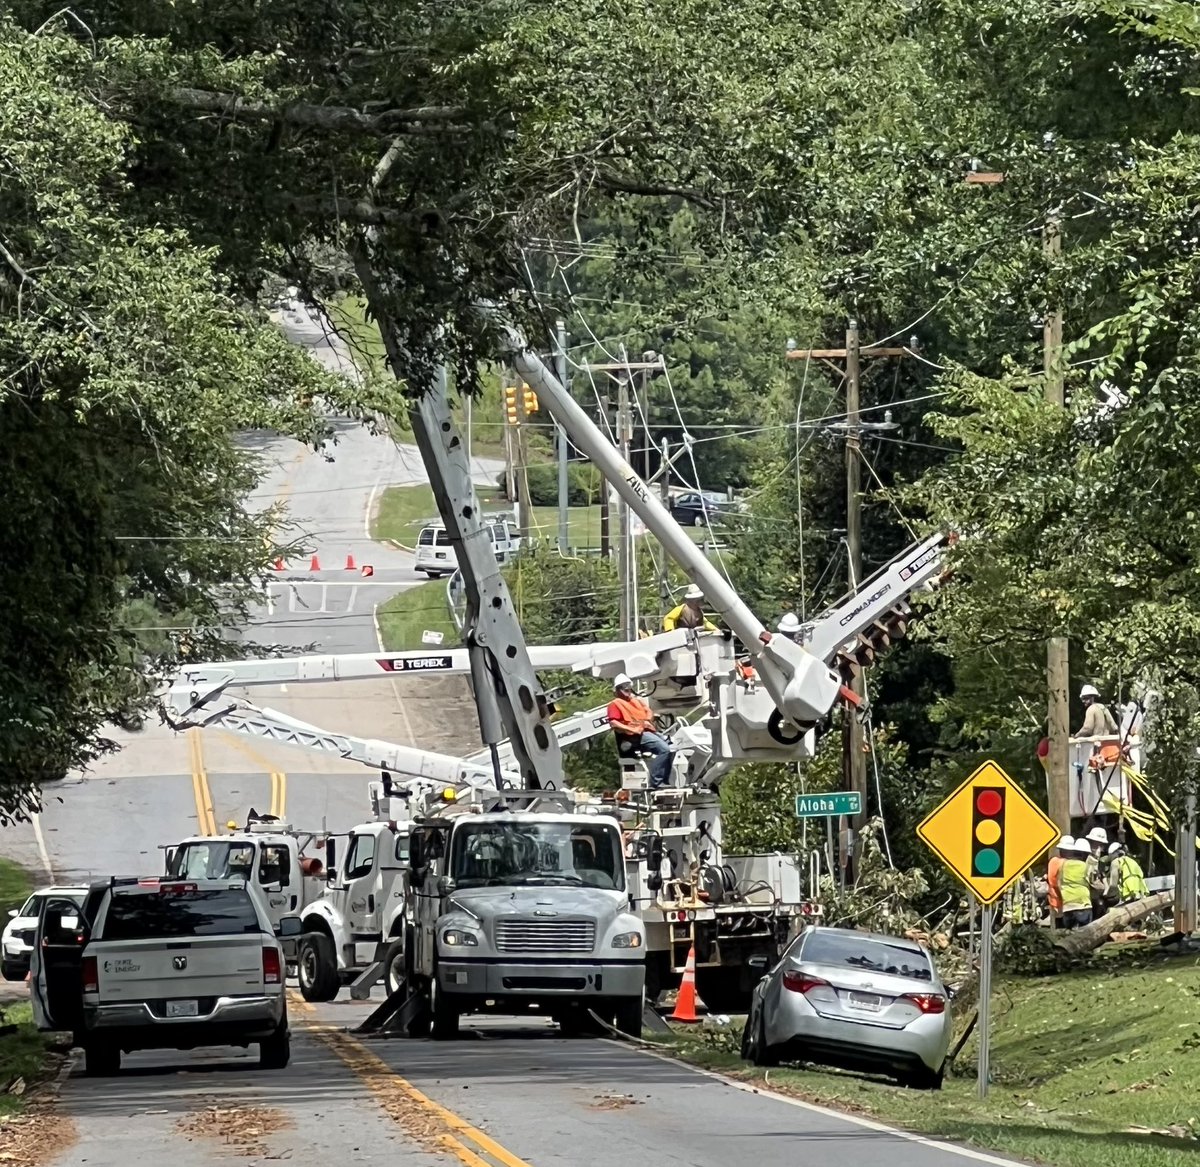 Storm damage in Anderson near Hwy. 76 and Pearman Dairy Rd.

Thank you for your patience while crews work to safely remove trees, repair/replace damaged equipment, and restore power.

#thankalineworker